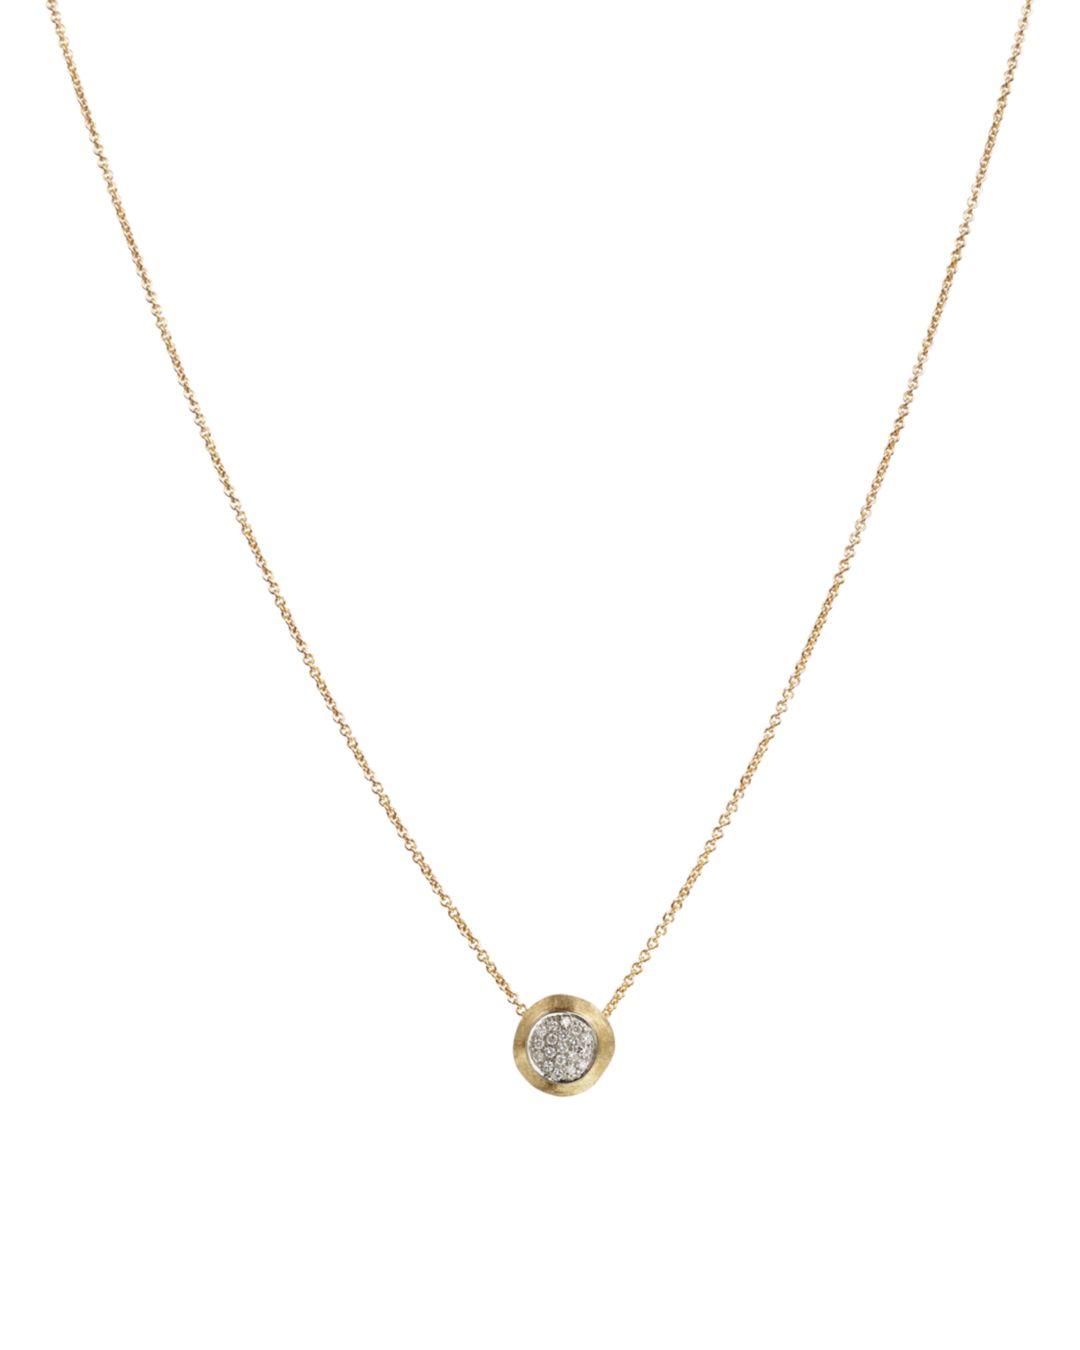 Marco Bicego 18k Yellow Gold Delicati Pendant Necklace With Diamonds in ...